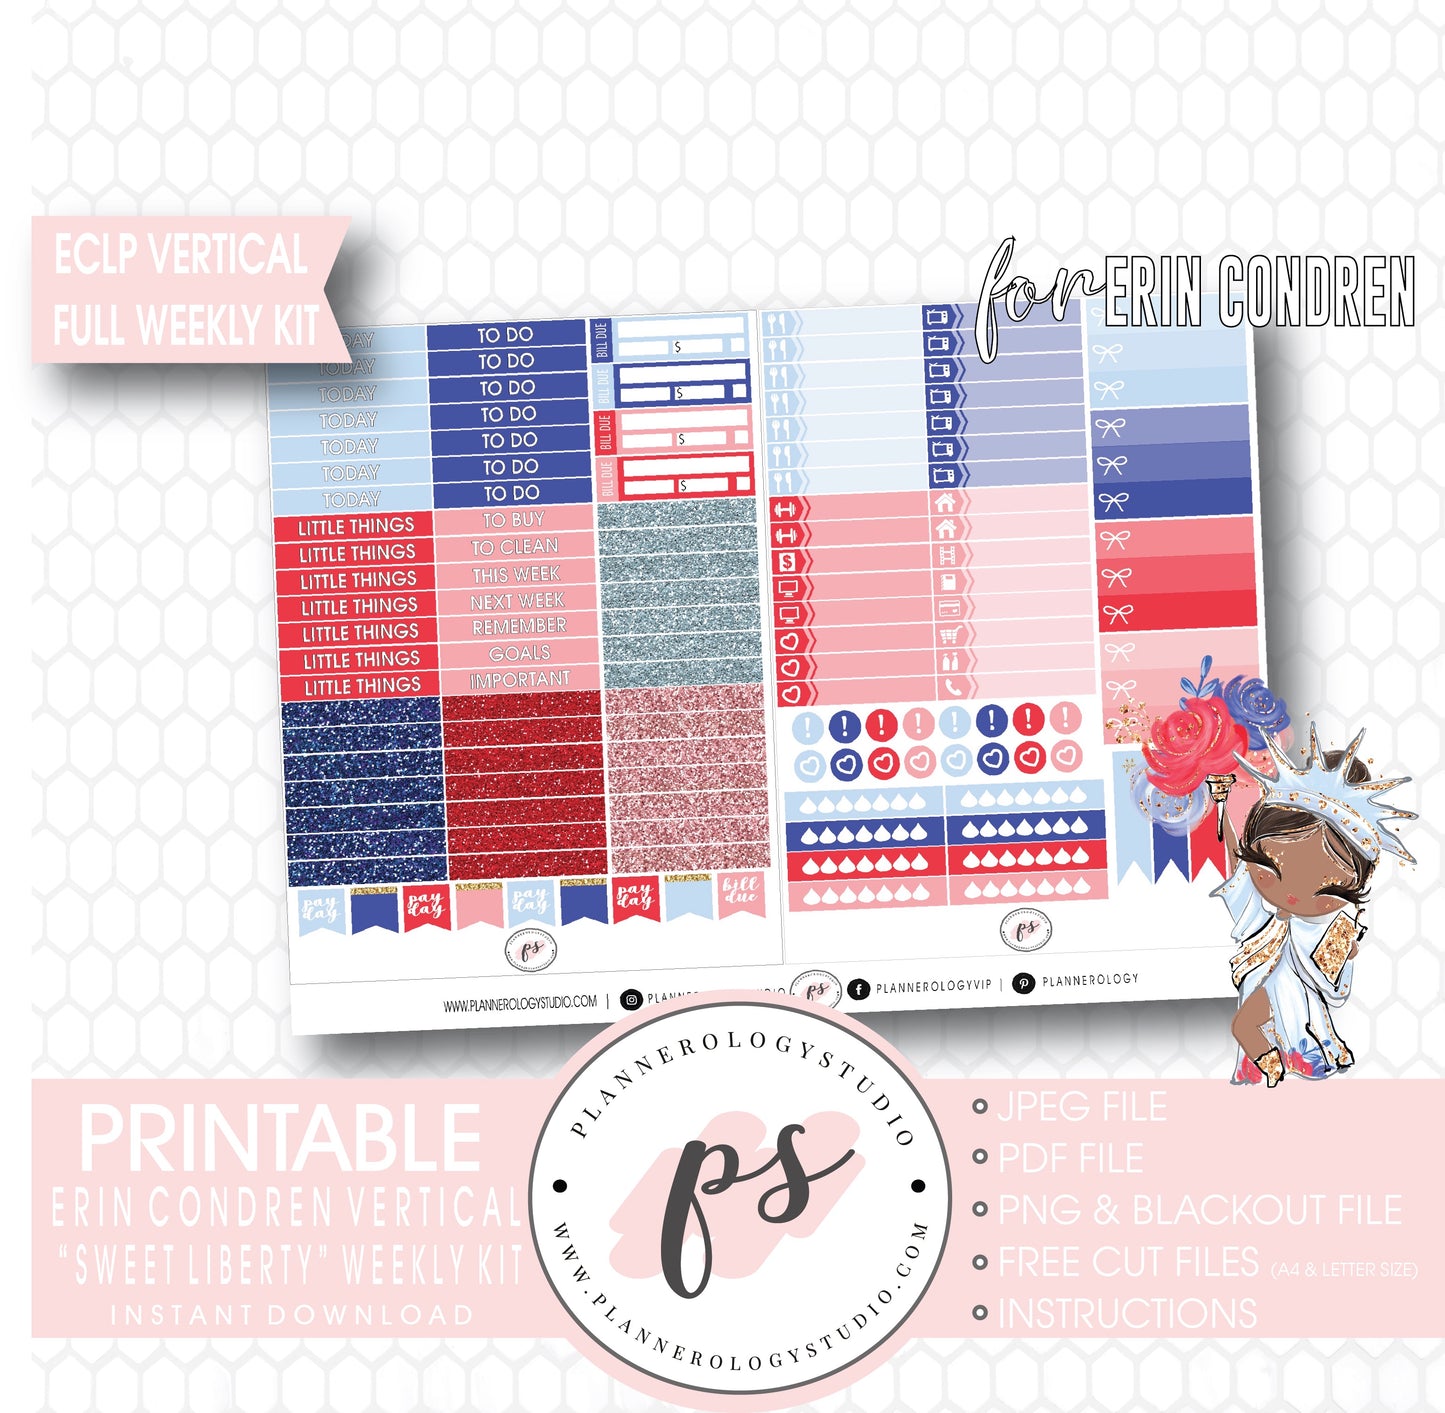 Sweet Liberty (Independence Day) Full Weekly Kit Printable Planner Digital Stickers (for use with Standard Vertical A5 Wide Planners)